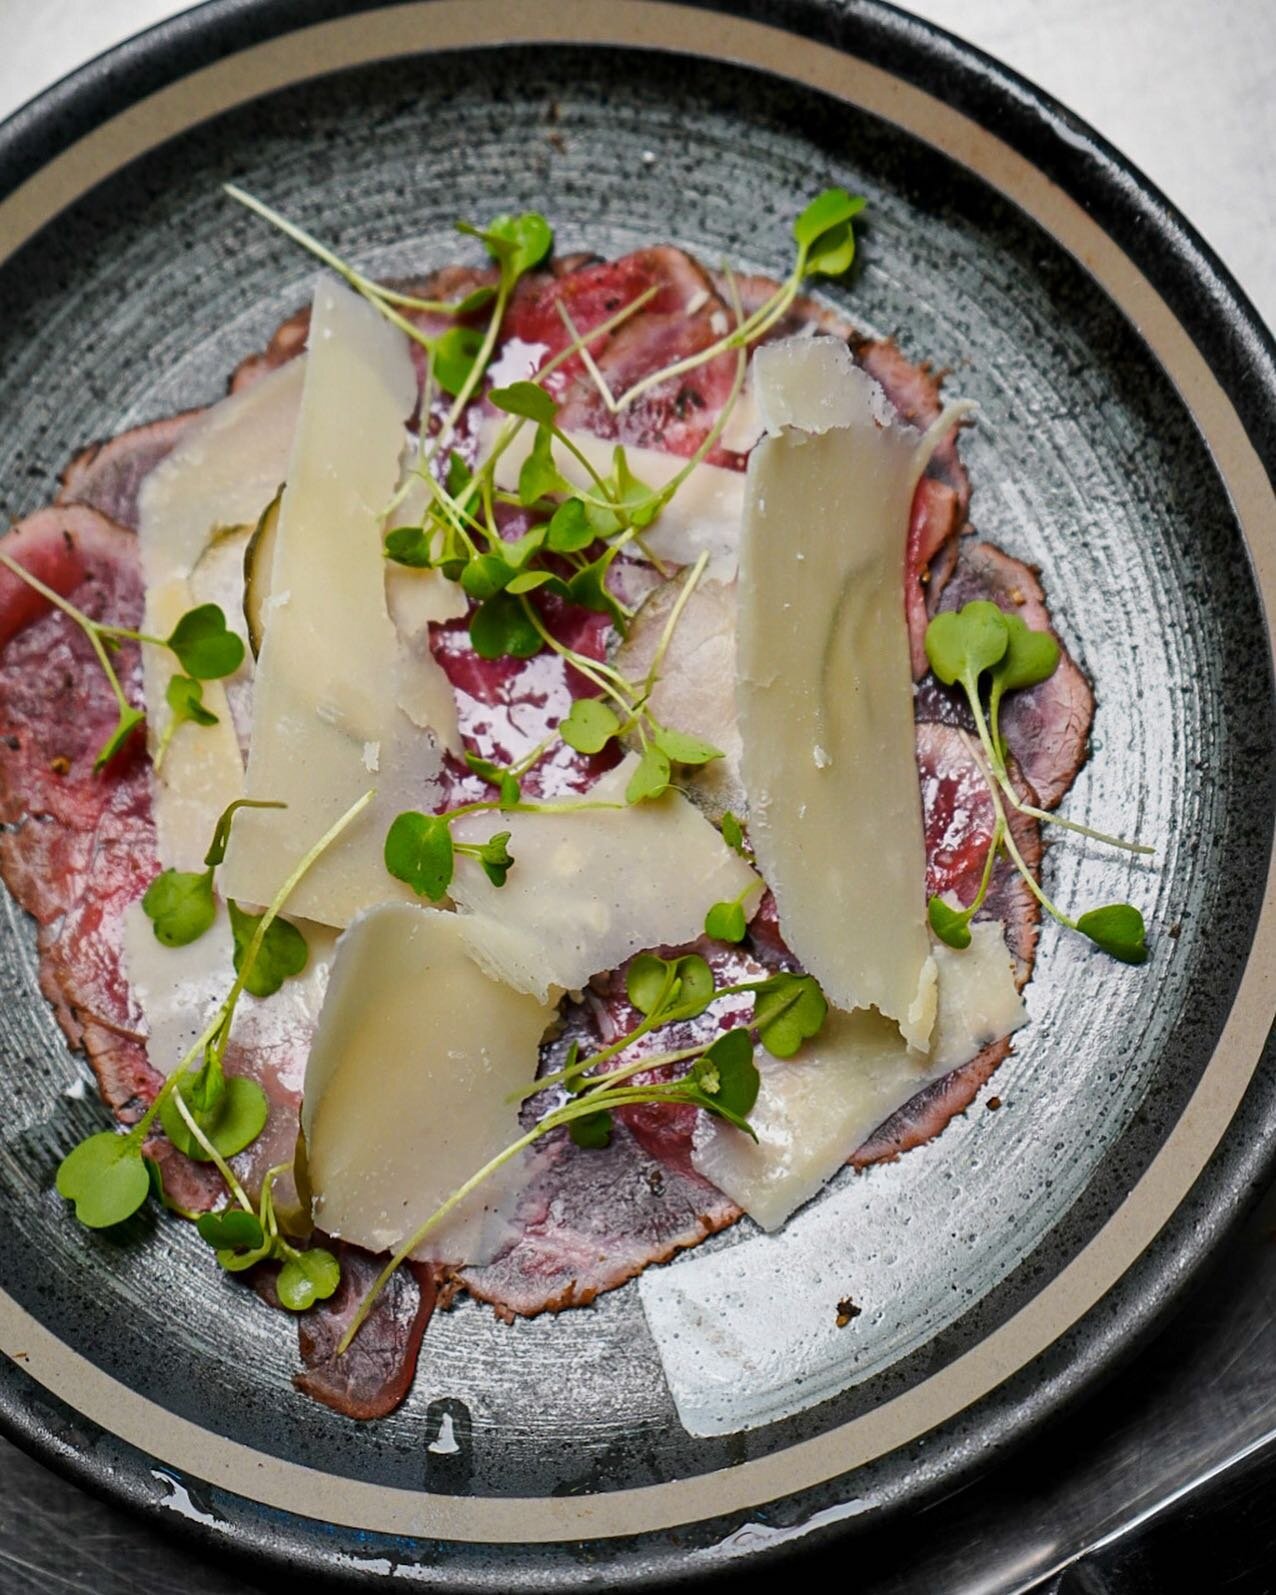 lamb carpaccio with shaved parmesan, arugula, and a black pepper rub (lamb iron chef menu)

-
In response to the new public health restrictions, we will be seating at a 50% limited capacity as of tomorrow. We highly recommend making a reservation by 